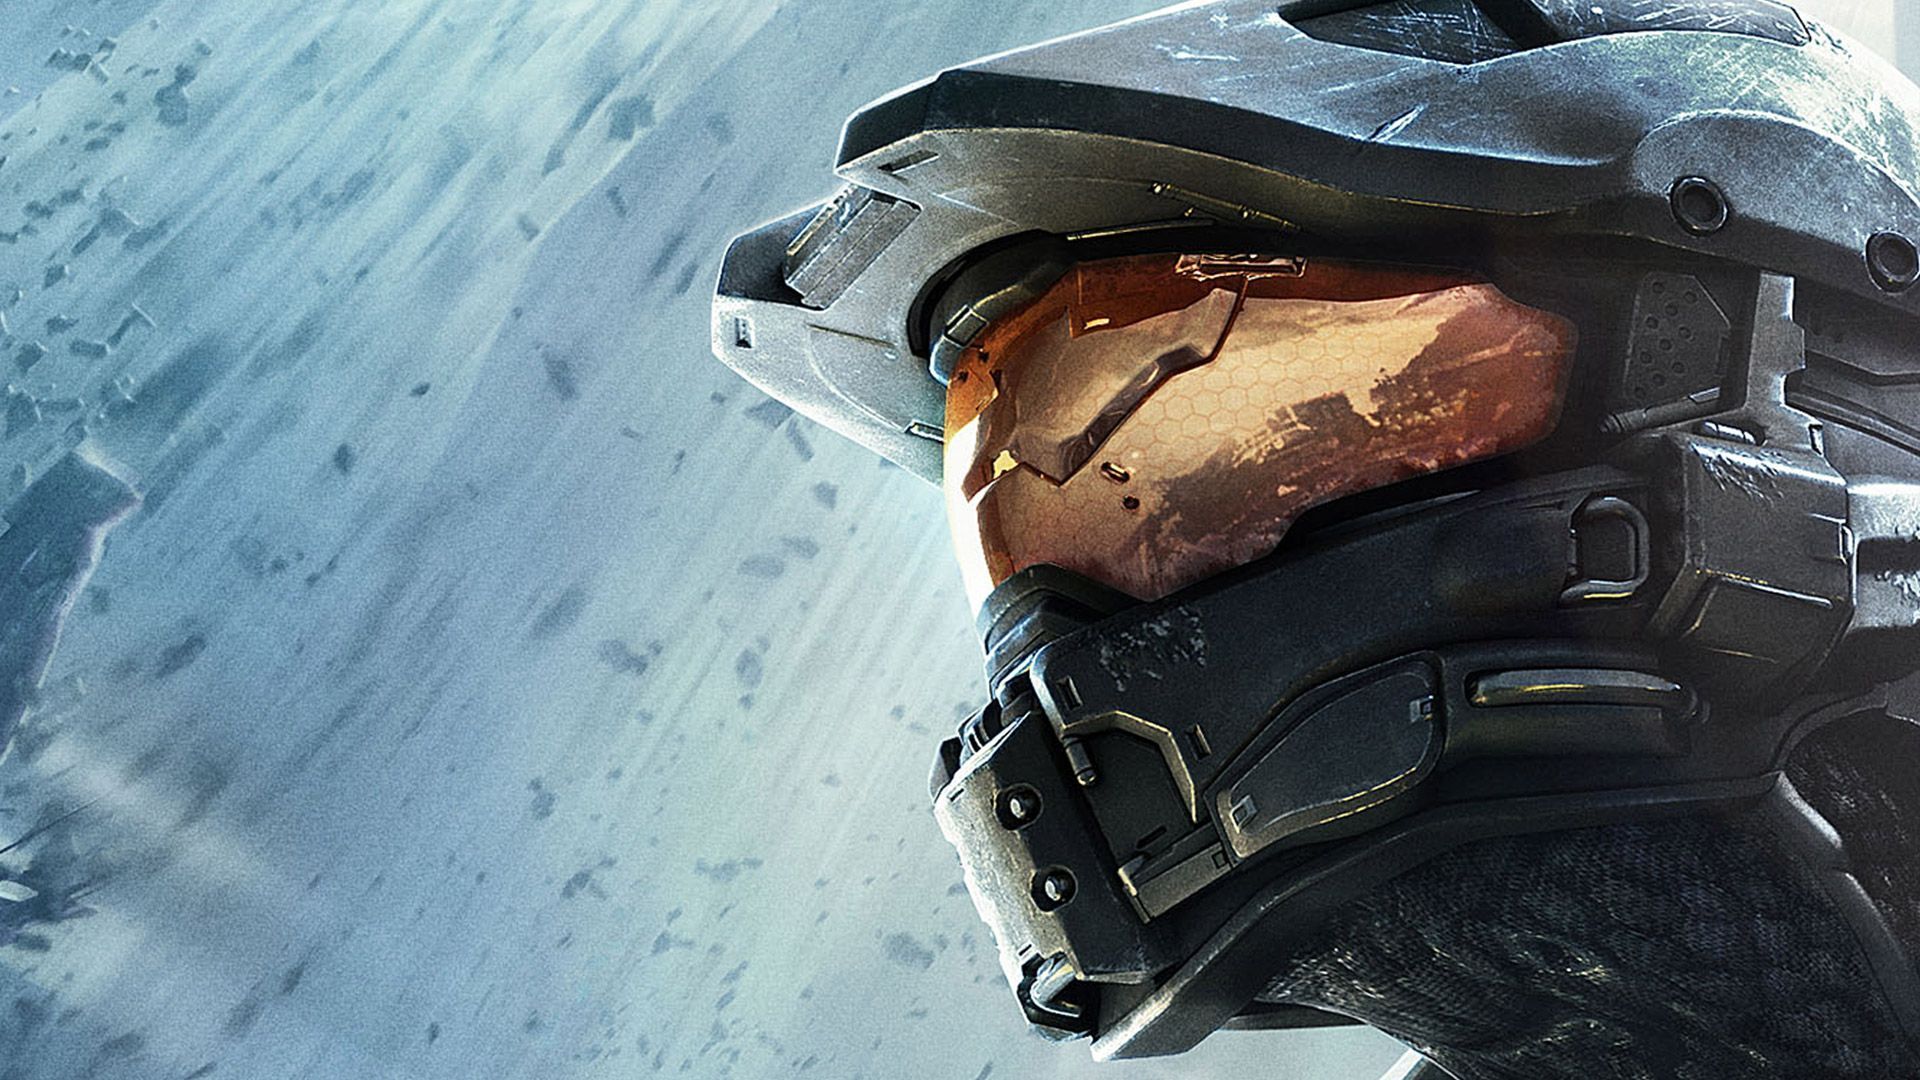 Halo 4 Master Chief Full HD Wallpapers 14018 - Amazing Wallpaperz